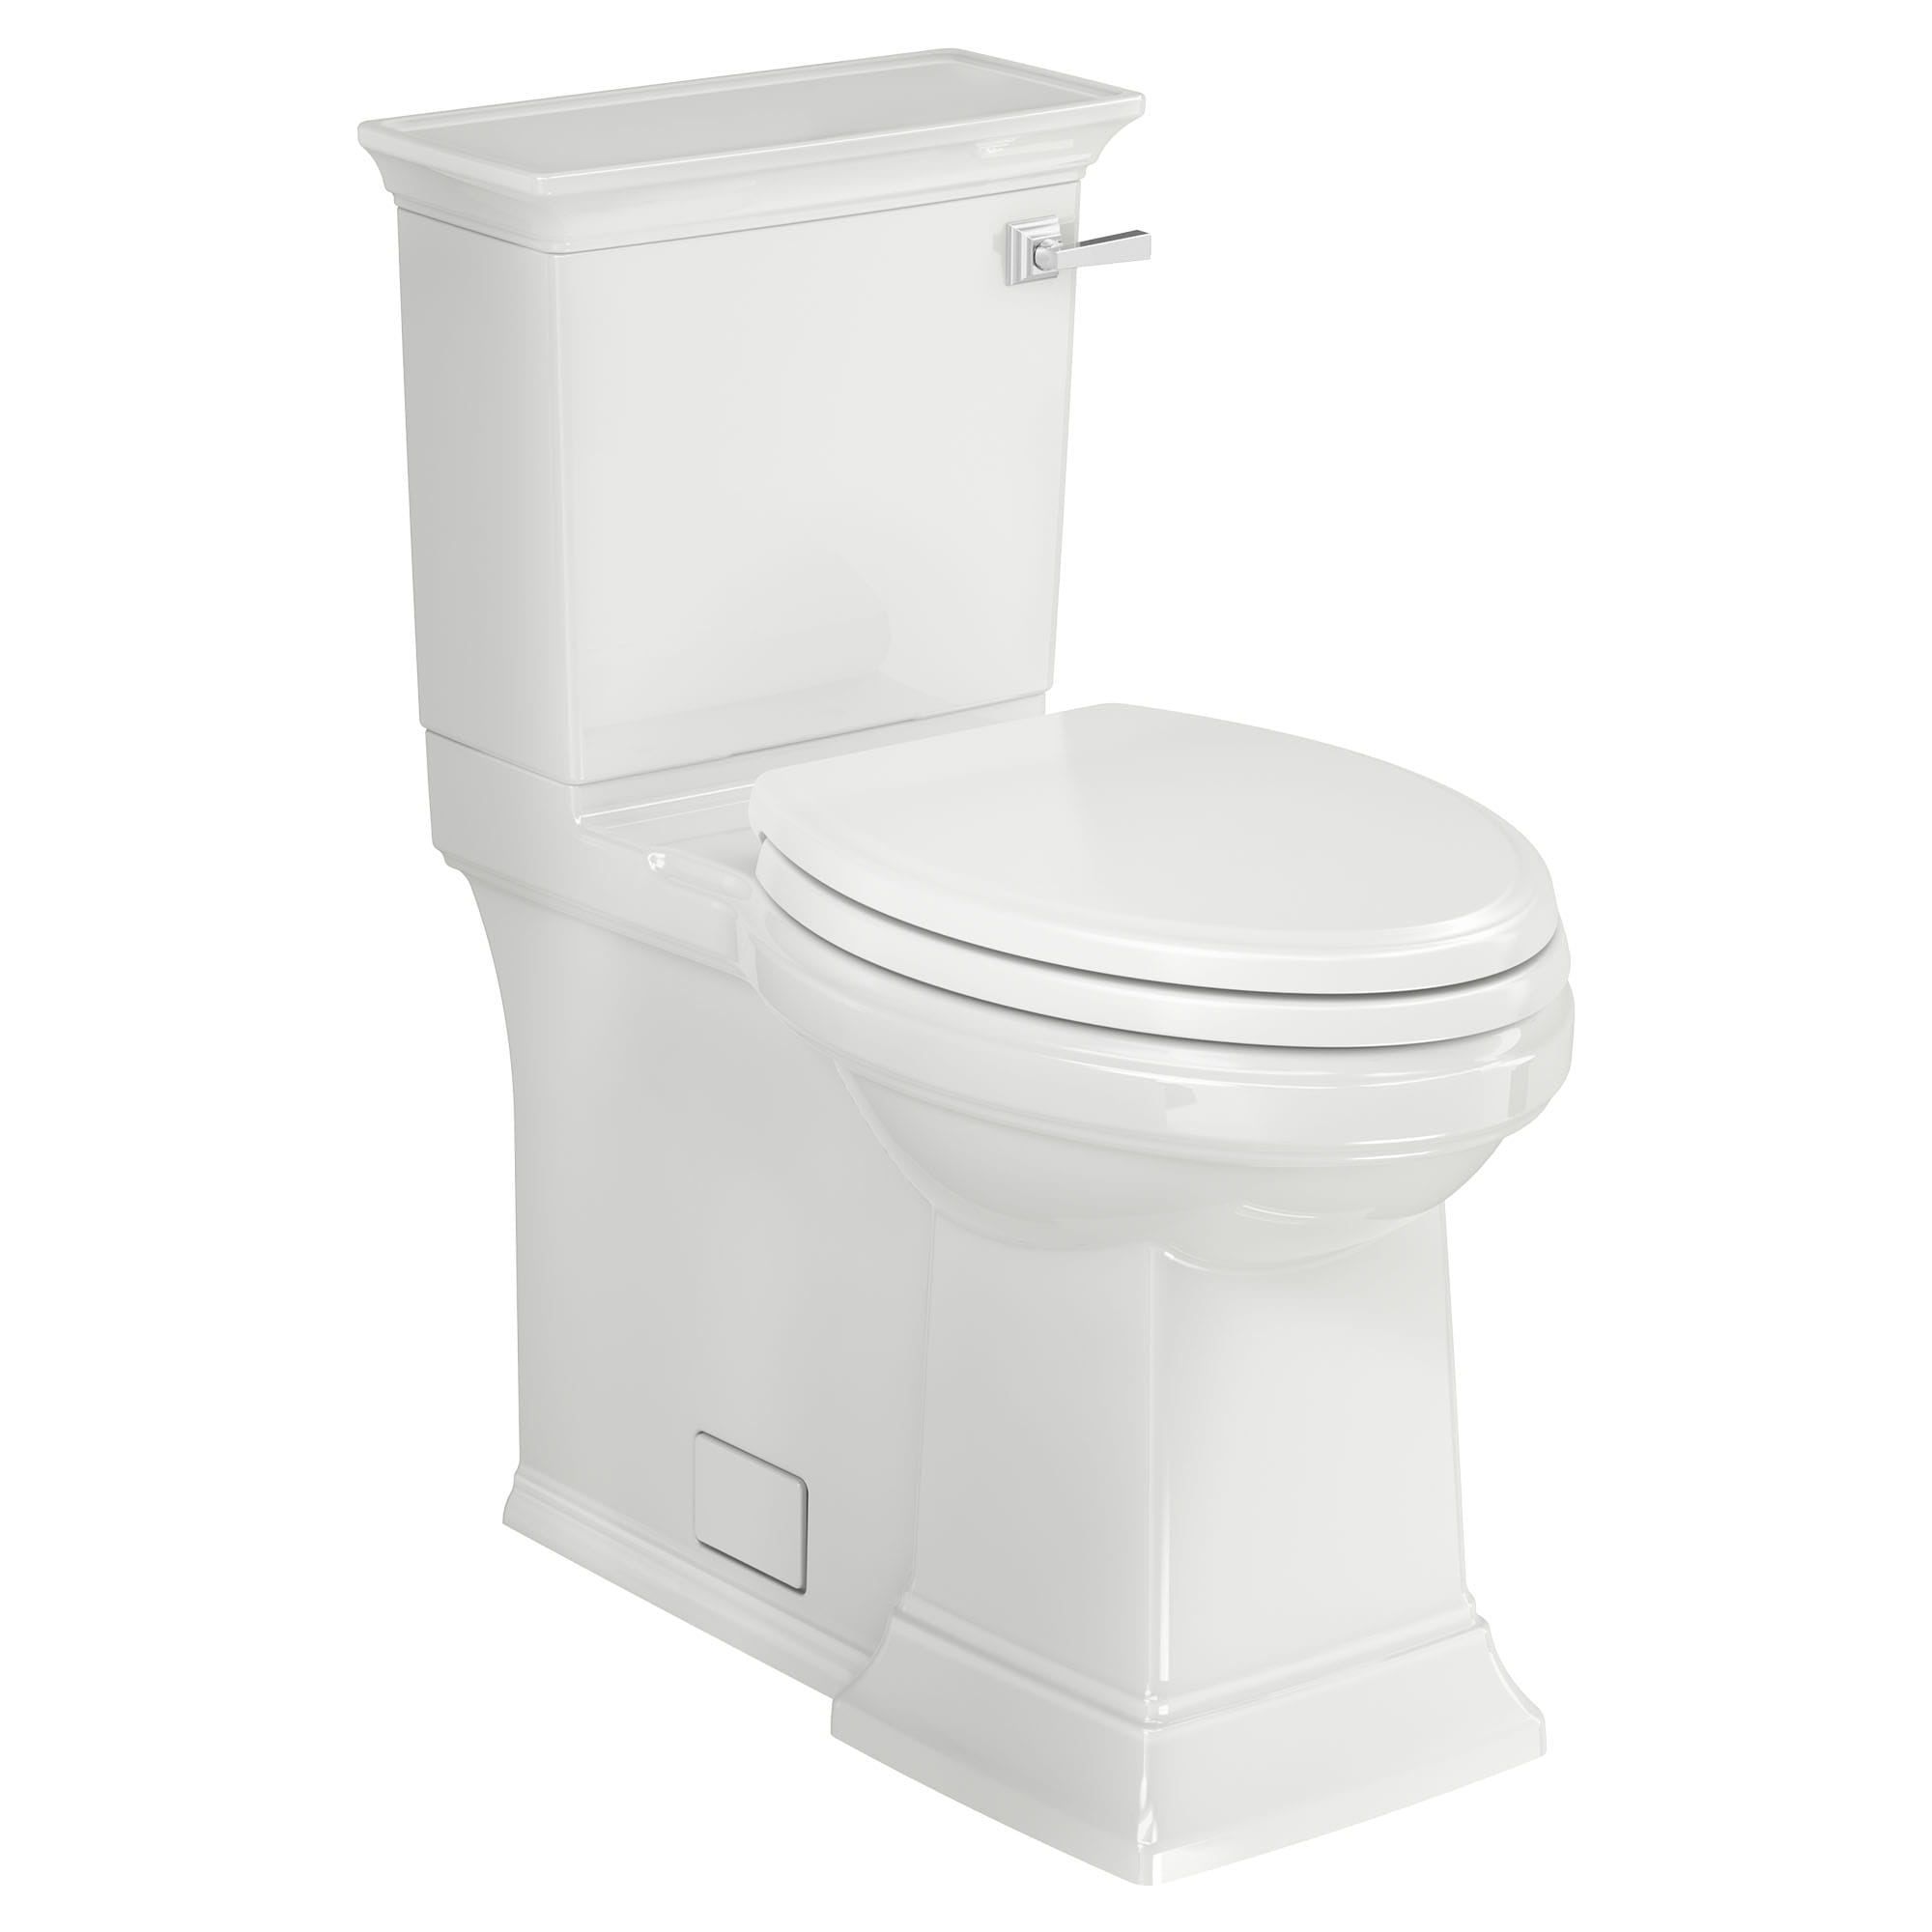 Town Square® S Skirted Two-Piece 1.28 gpf/4.8 Lpf Chair Height Right-Hand Trip Lever Elongated Toilet With Seat